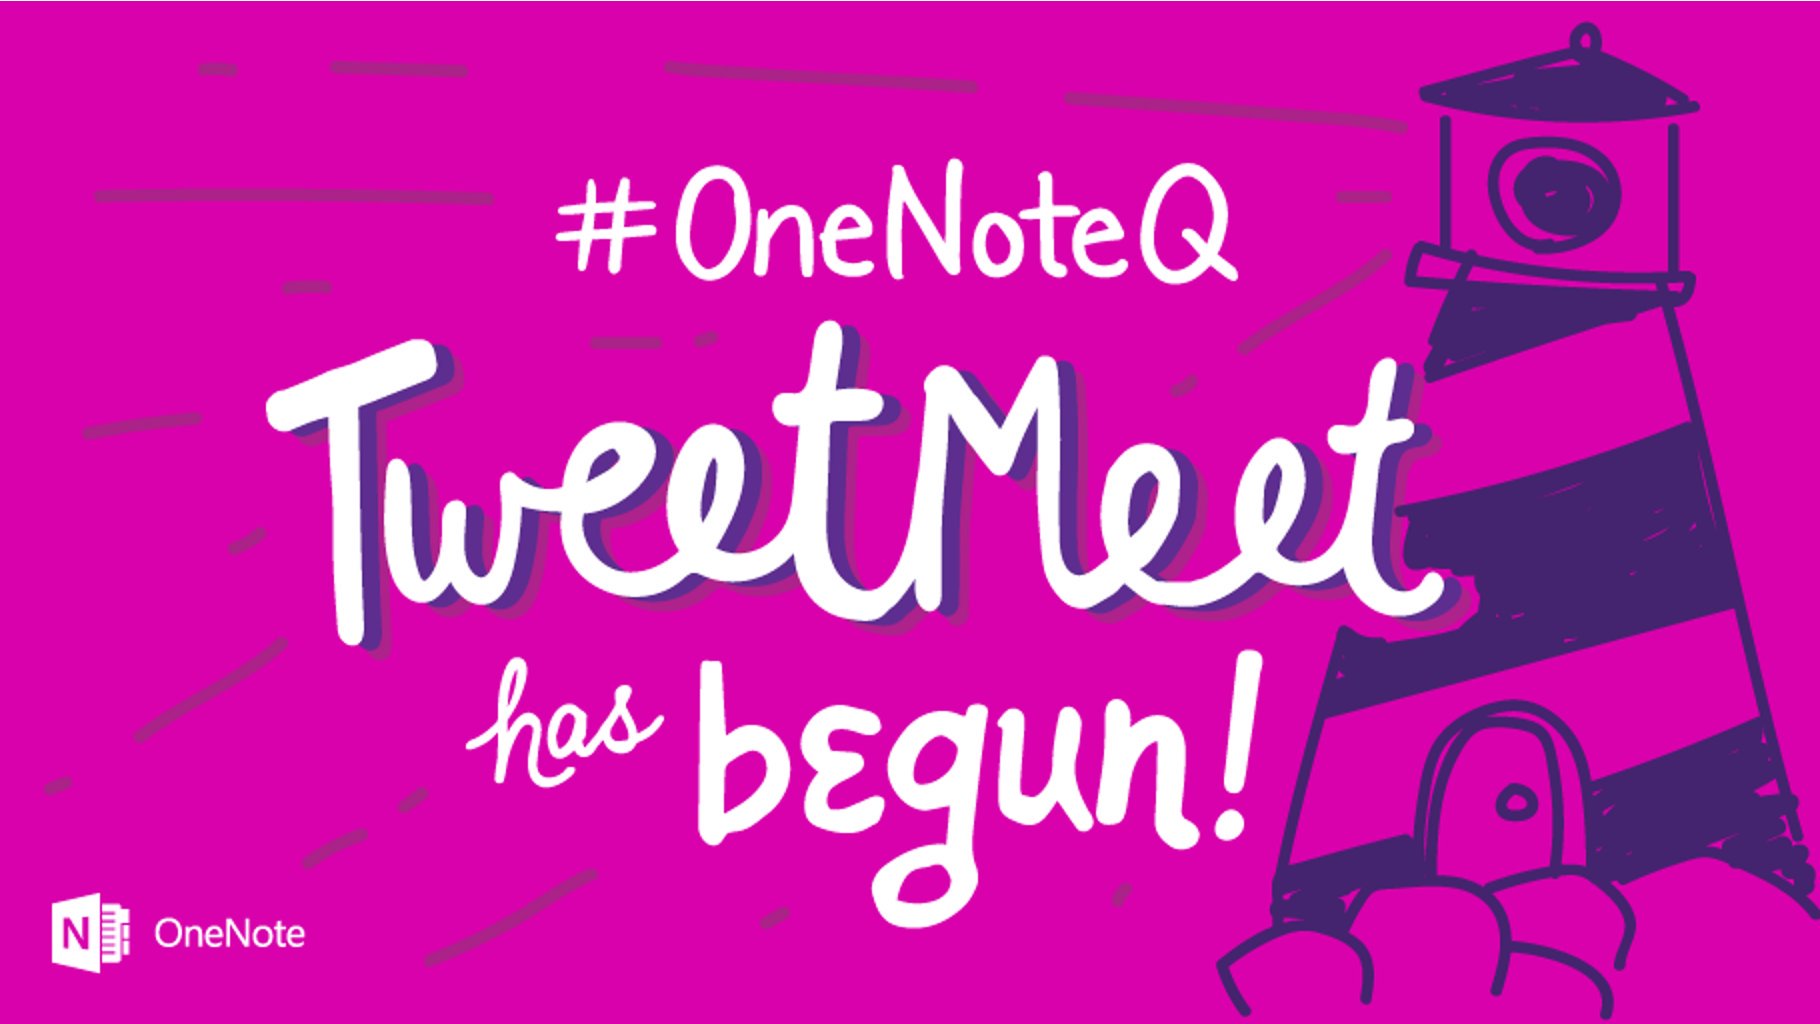 Welcome back everyone! #OneNote passion is global. Please send us a quick hello in your own language! 
#OneNoteQ https://t.co/YlGBurG19d